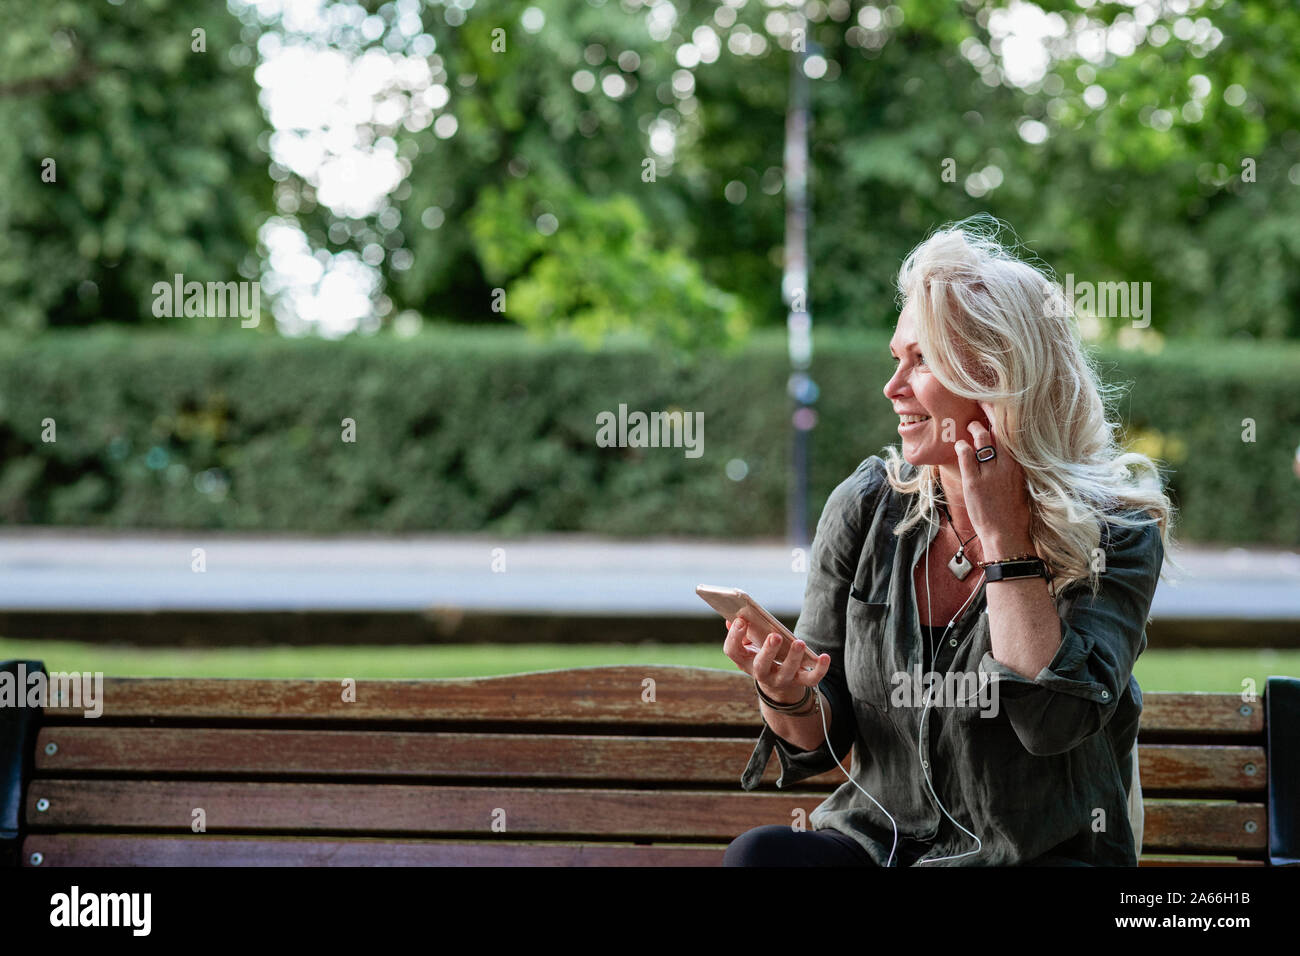 A woman sitting on a park bench listening to music on her MP3 player while looking sideways. Stock Photo